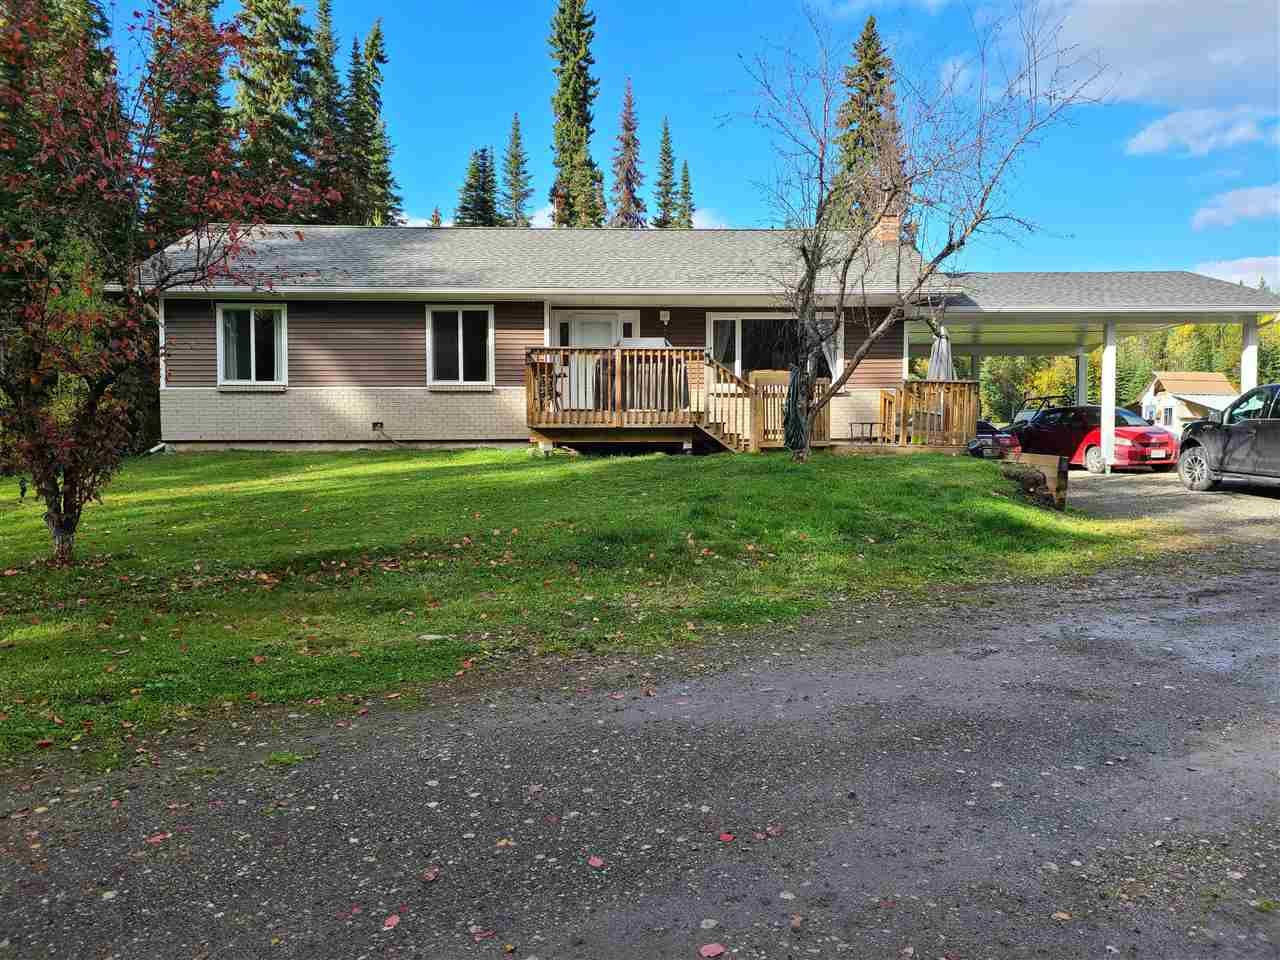 Main Photo: 4400 KNOEDLER Road in Prince George: Hobby Ranches House for sale (PG Rural North (Zone 76))  : MLS®# R2502367